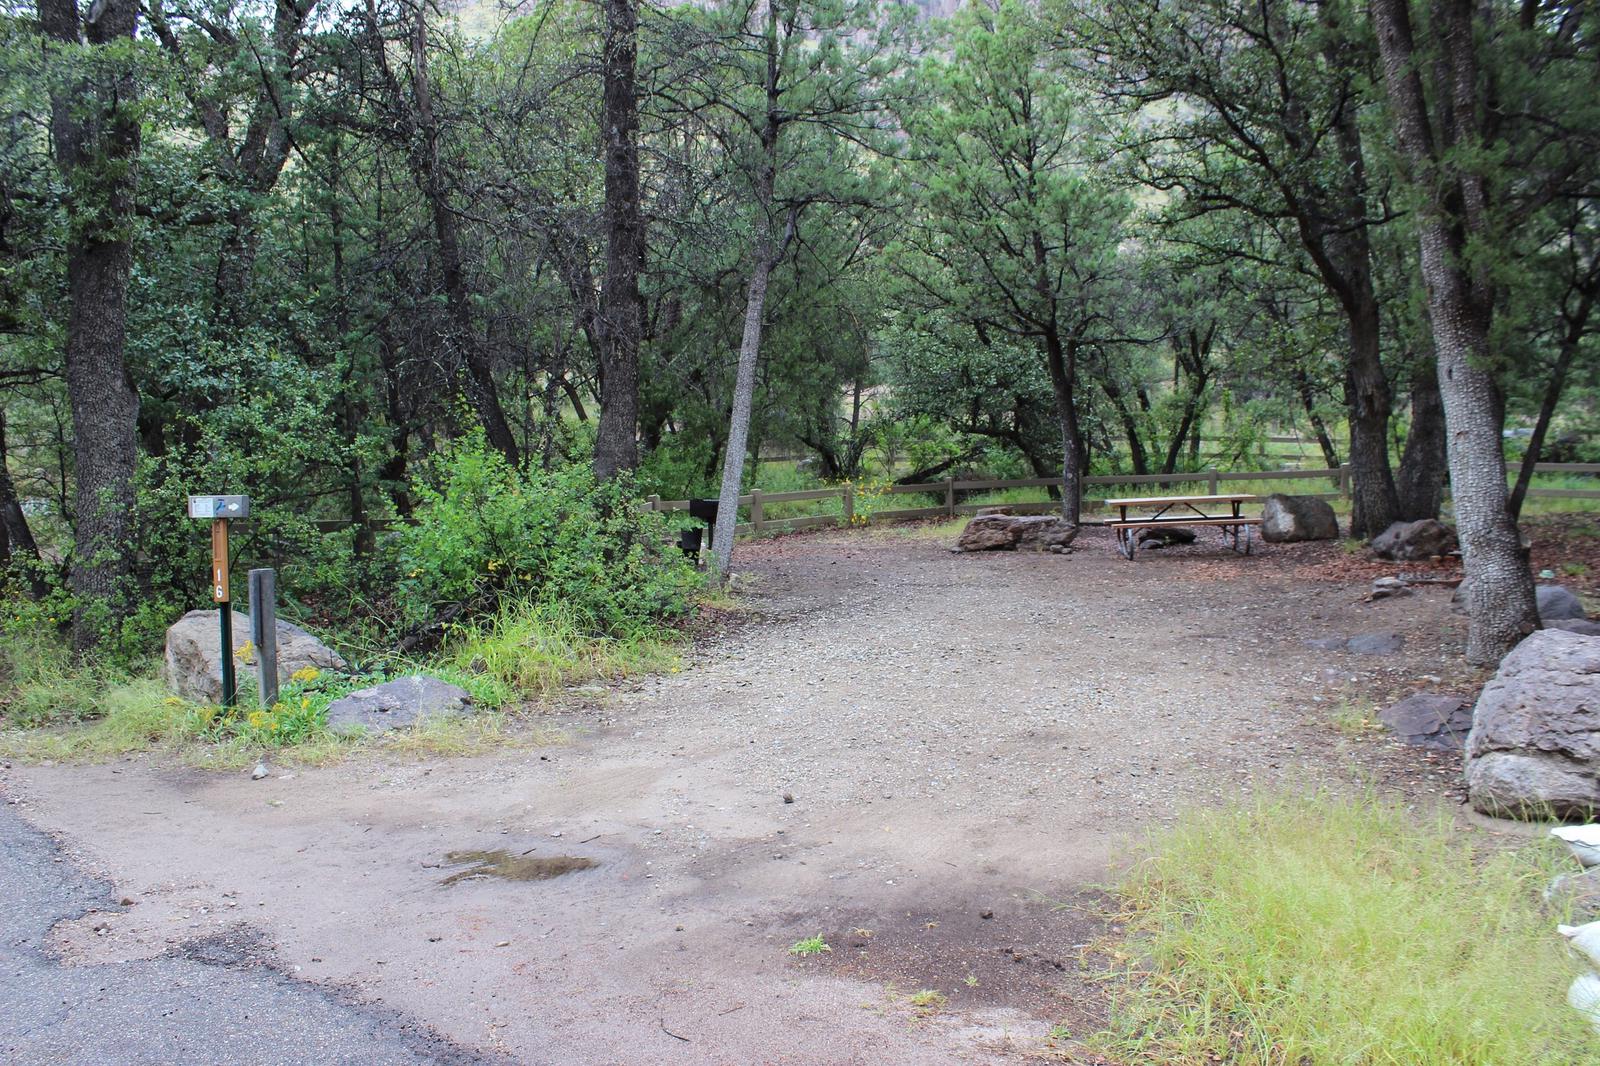 Volunteers have priority for campsite #16 and use of hookups.Campsite #16